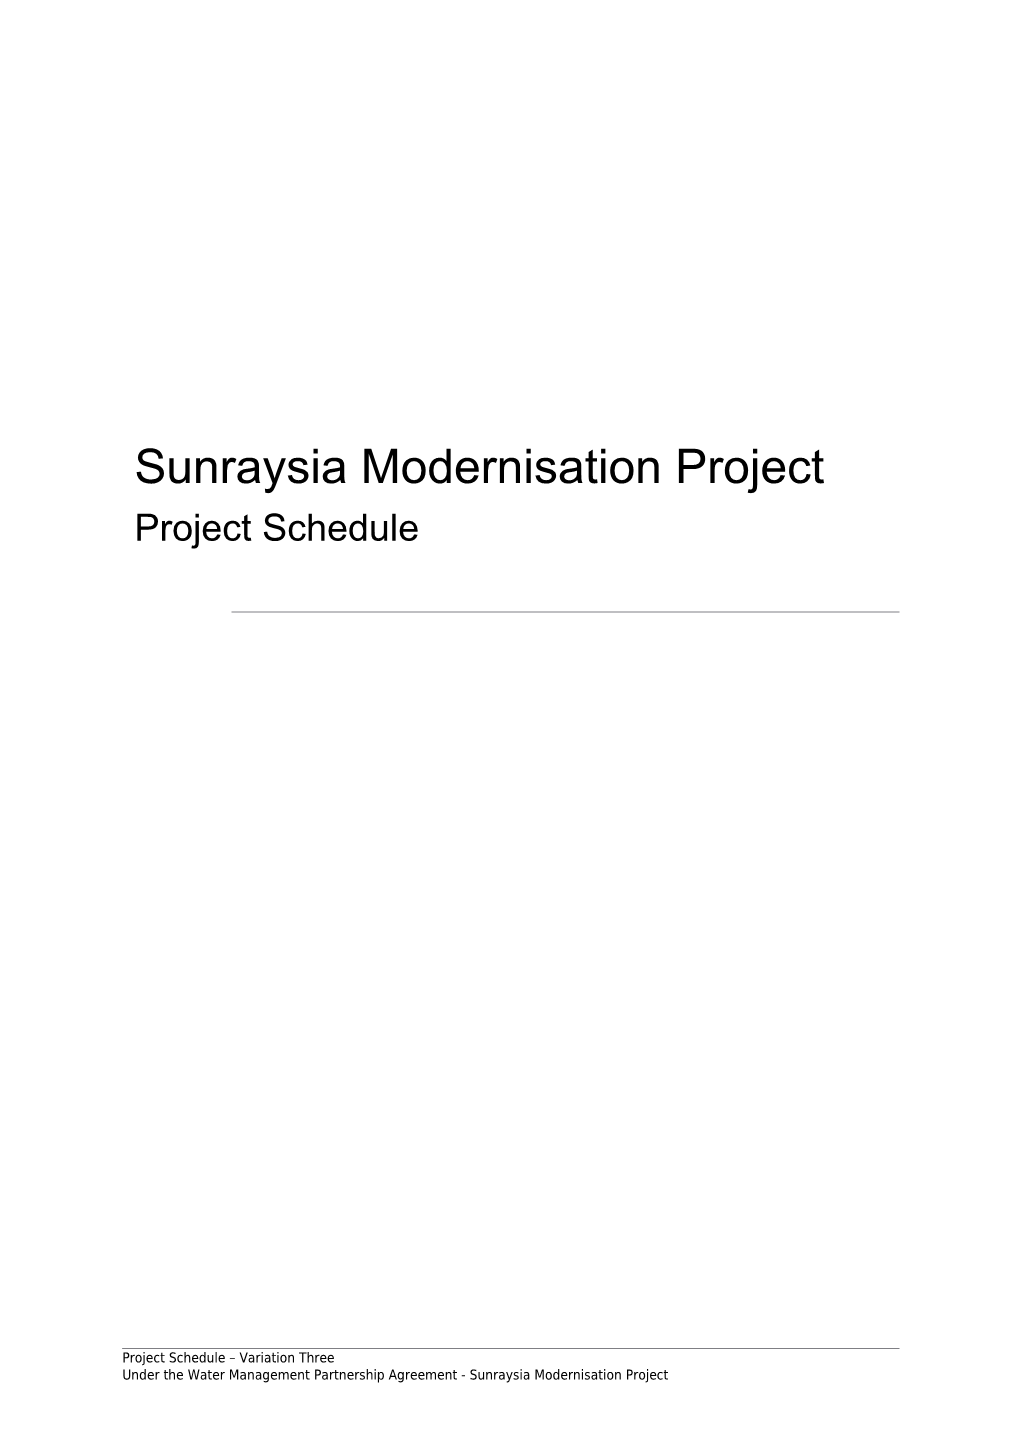 Sunraysia Modernisation Project Project Schedule